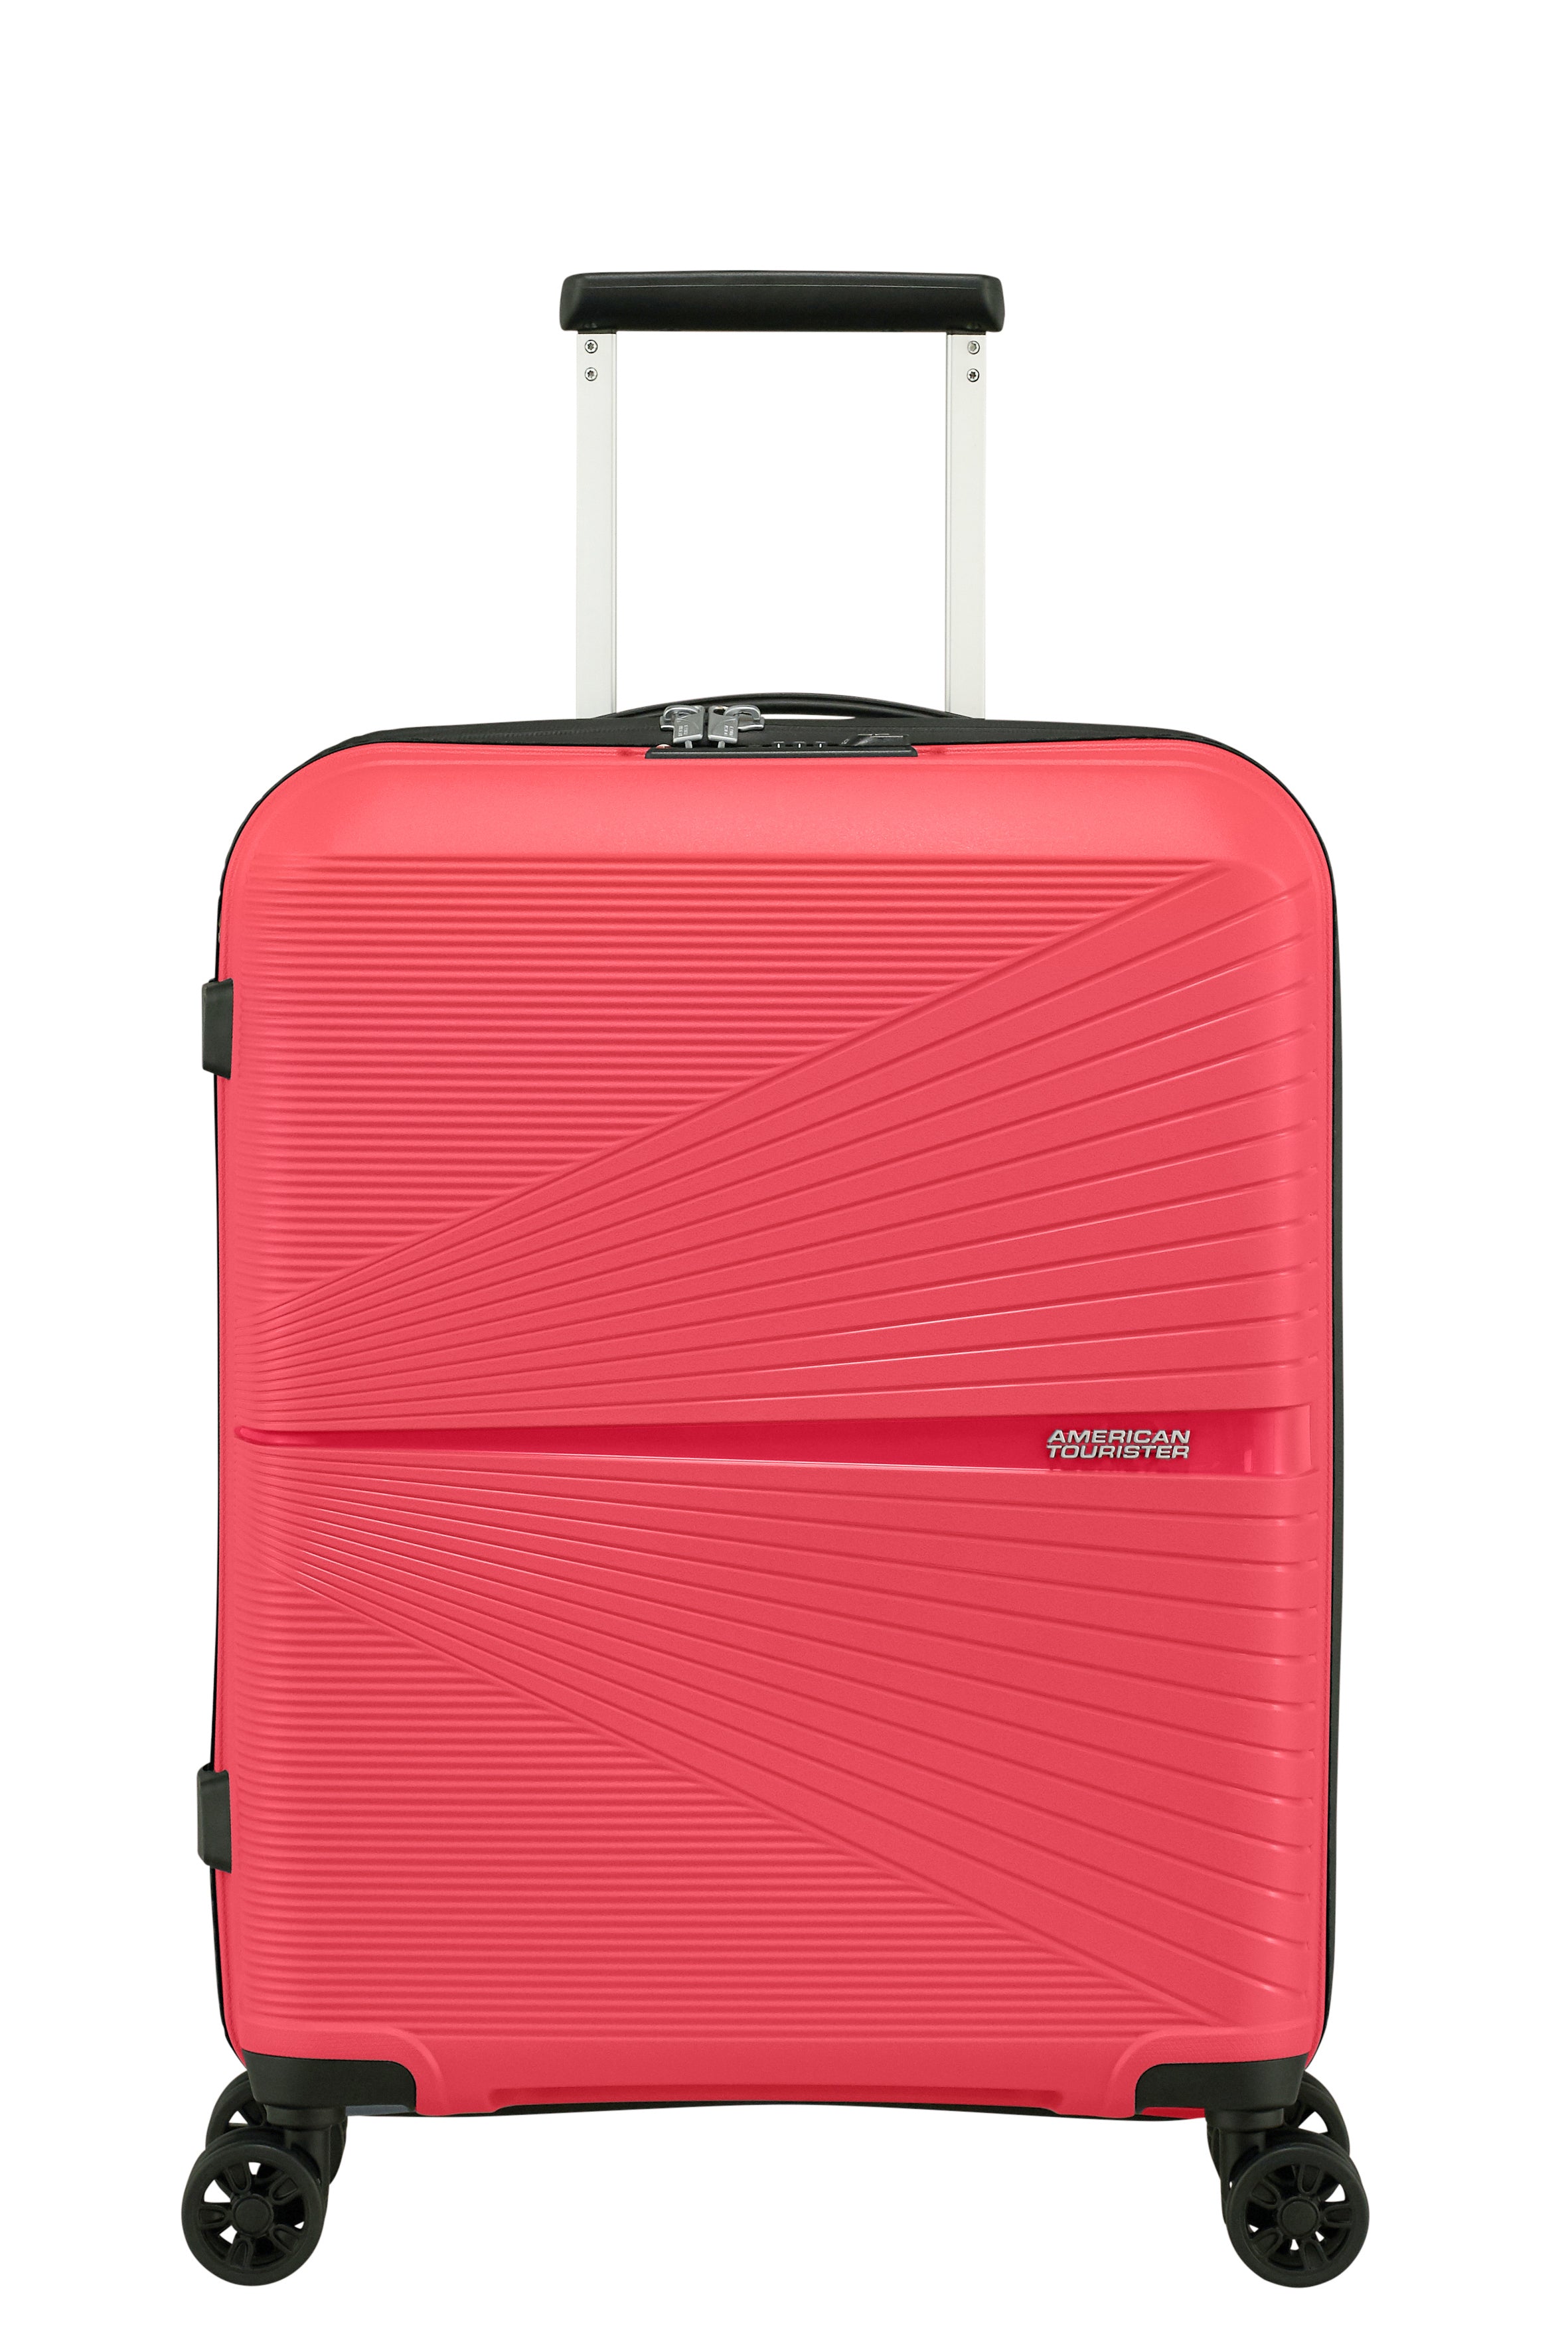 American Tourister - Airconic 55cm Small 4 Wheel Hard Suitcase - Paradise Pink-7